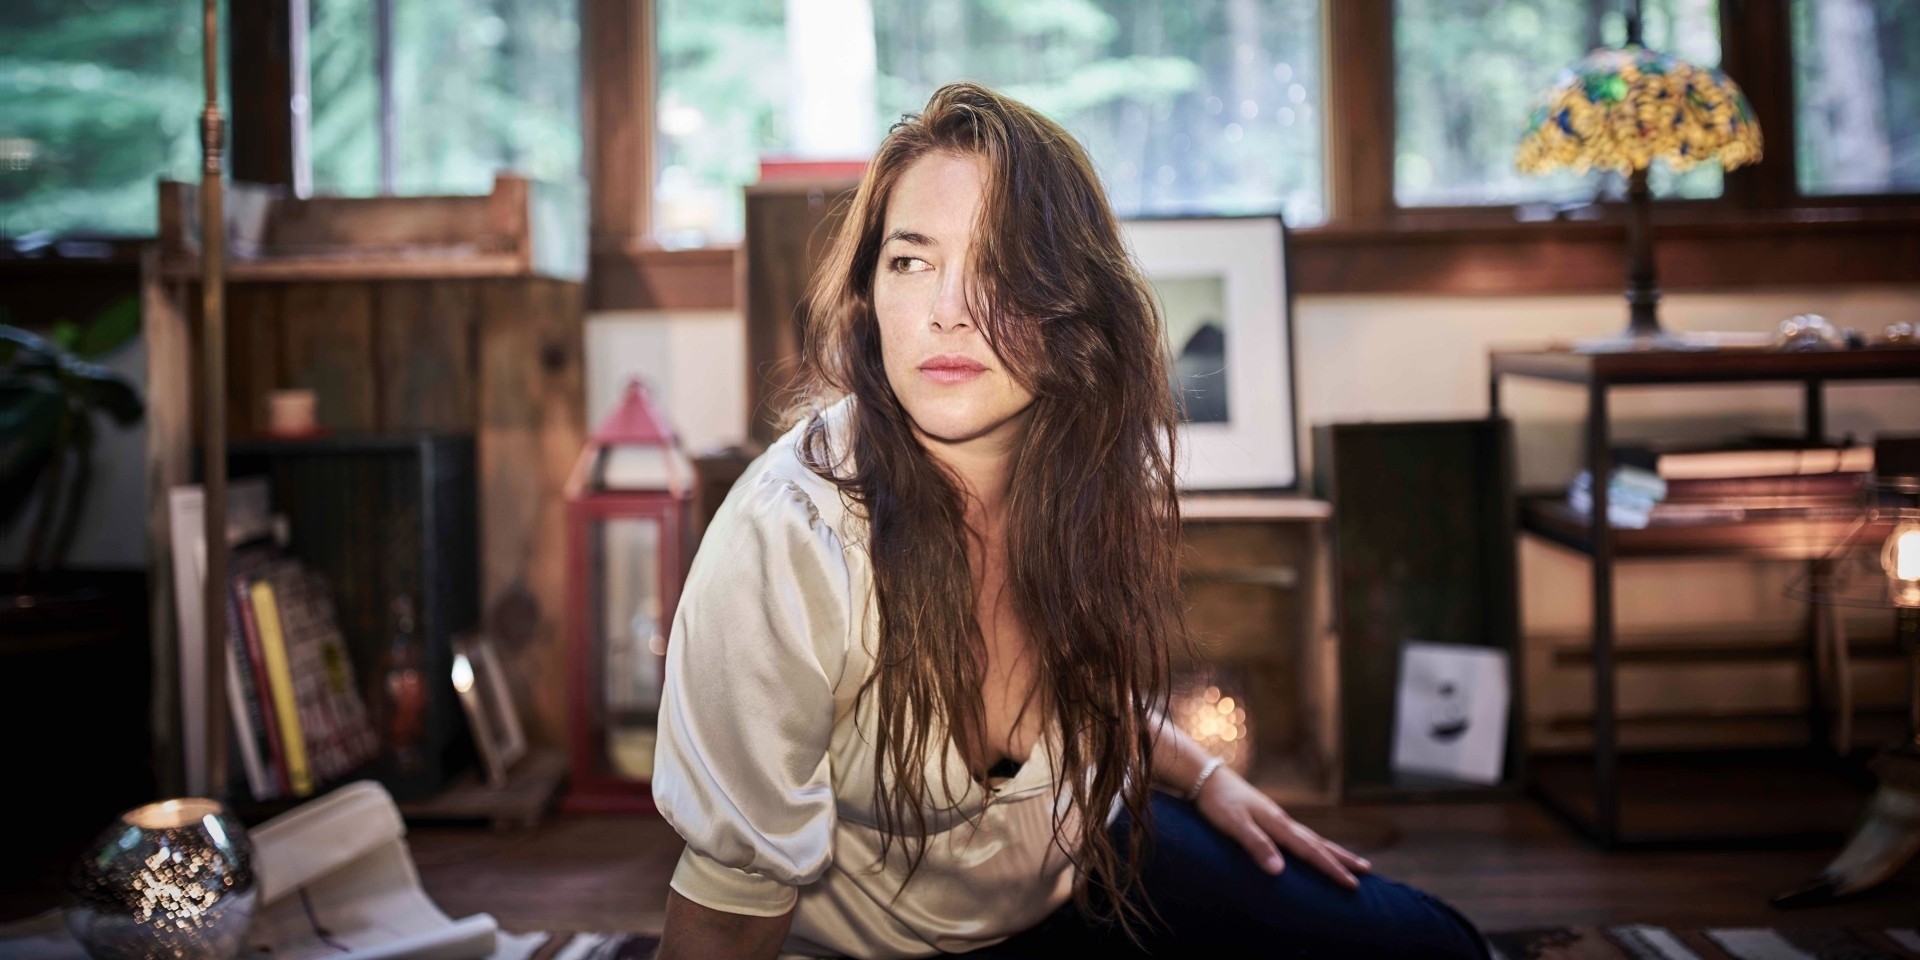 Rachael Yamagata will perform in Singapore in December